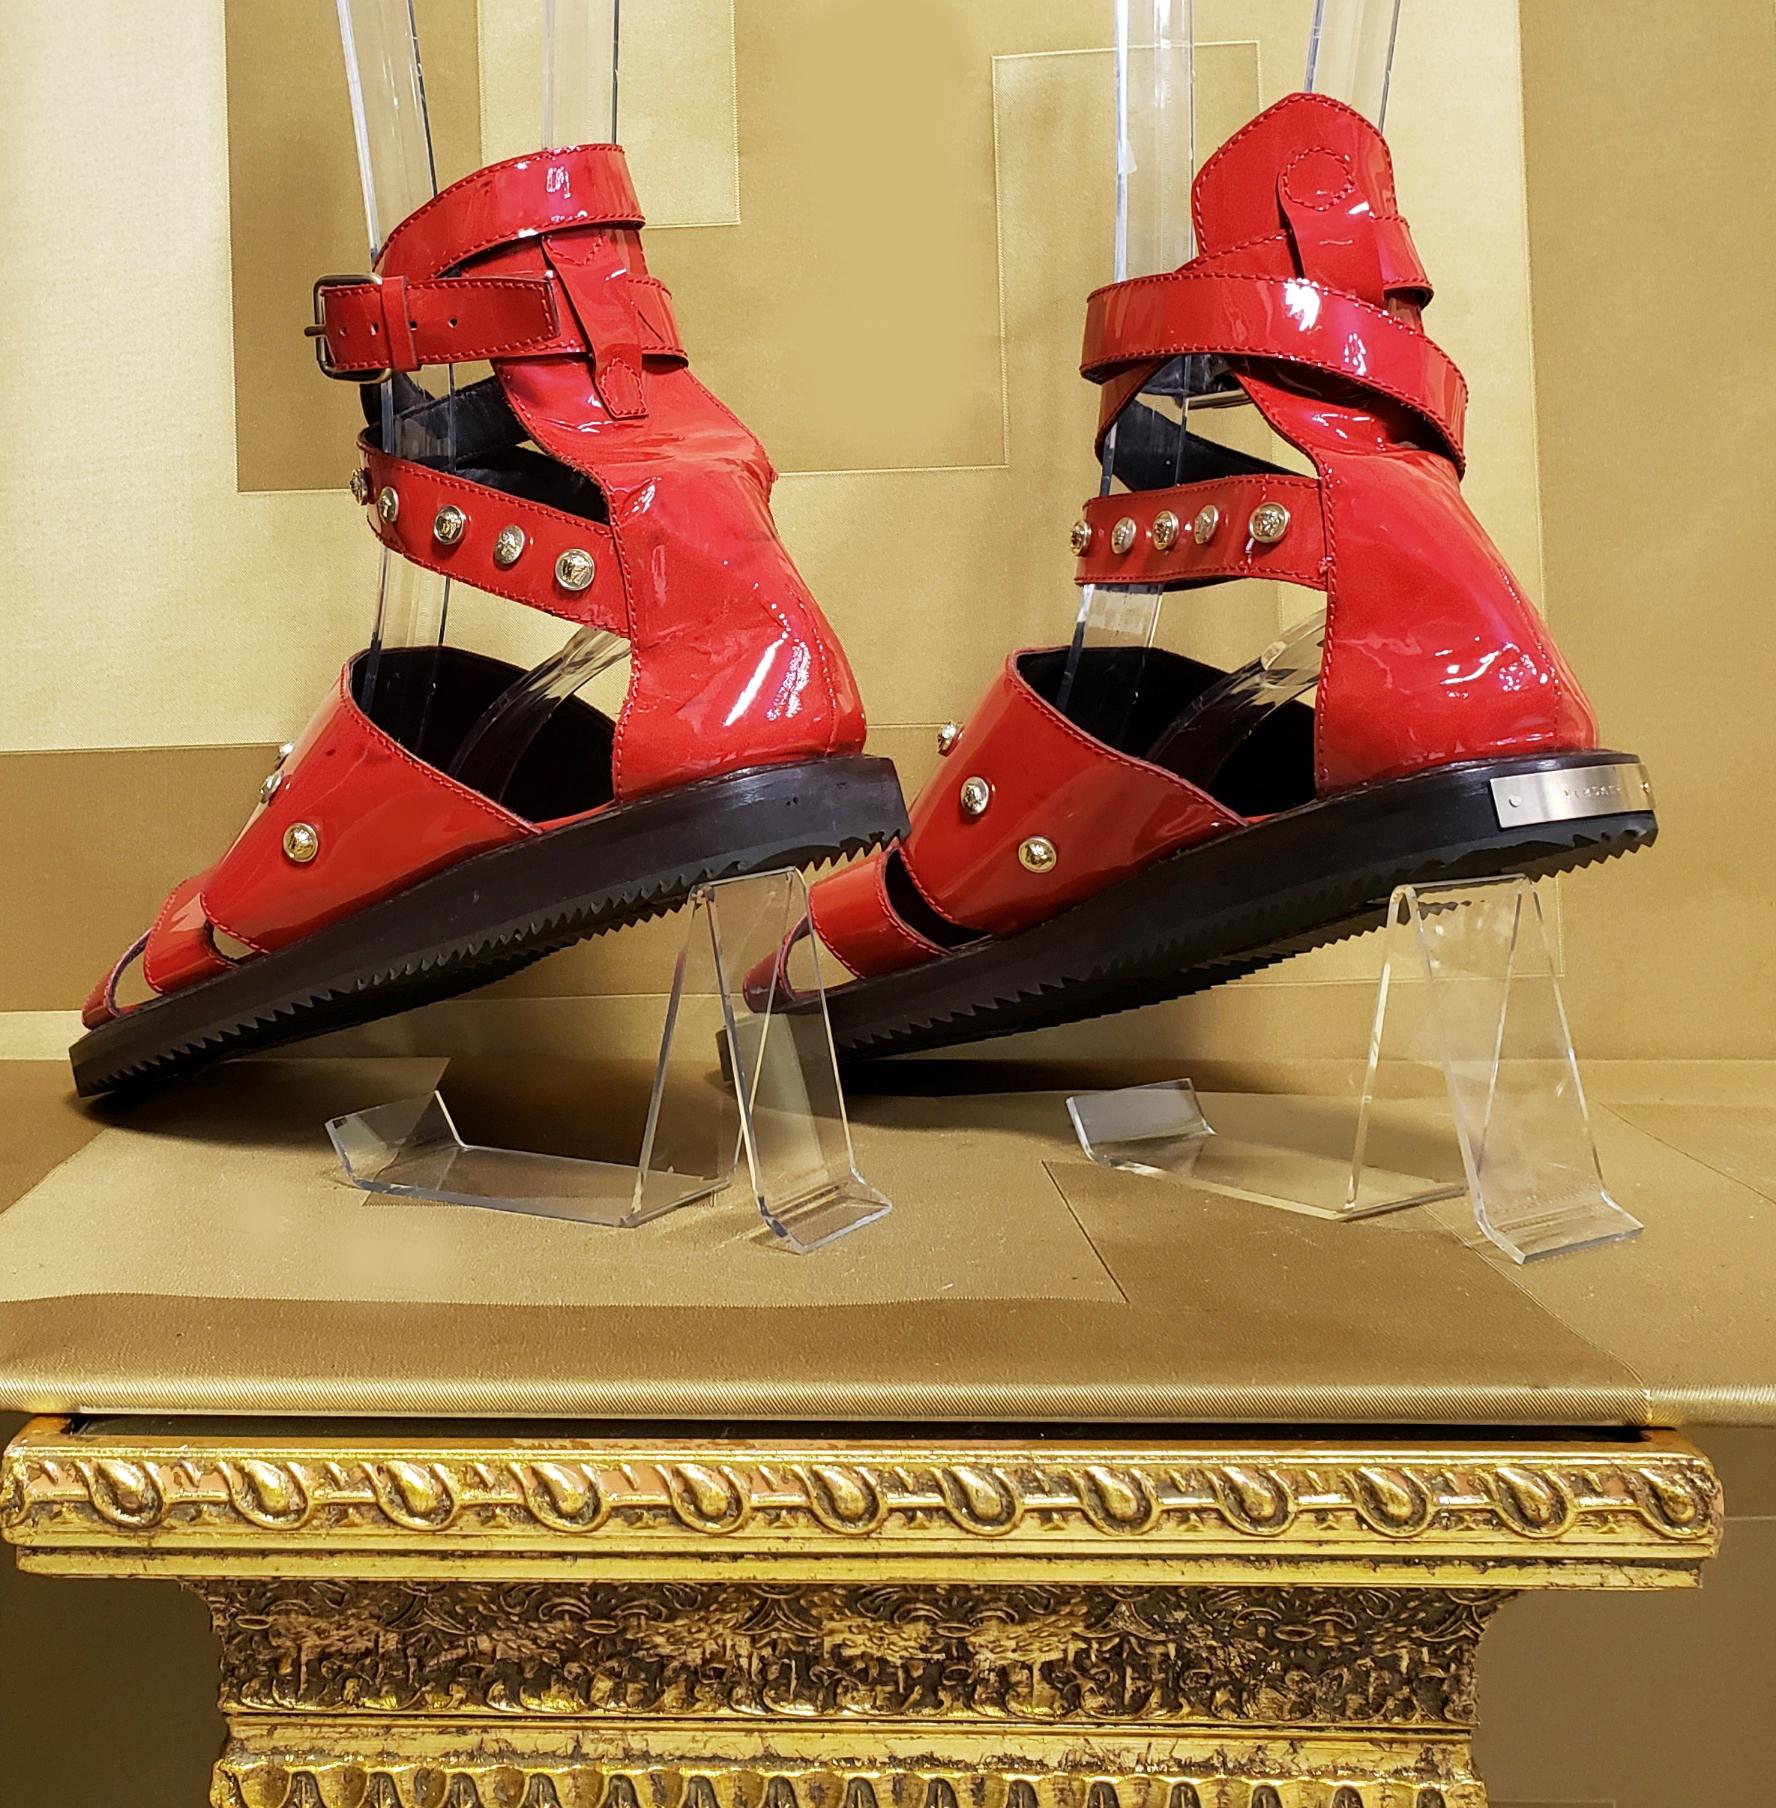 Men's HOT!!! S/S'12 Look #32 VERSACE RED LEATHER SANDALS SHOES 44-11